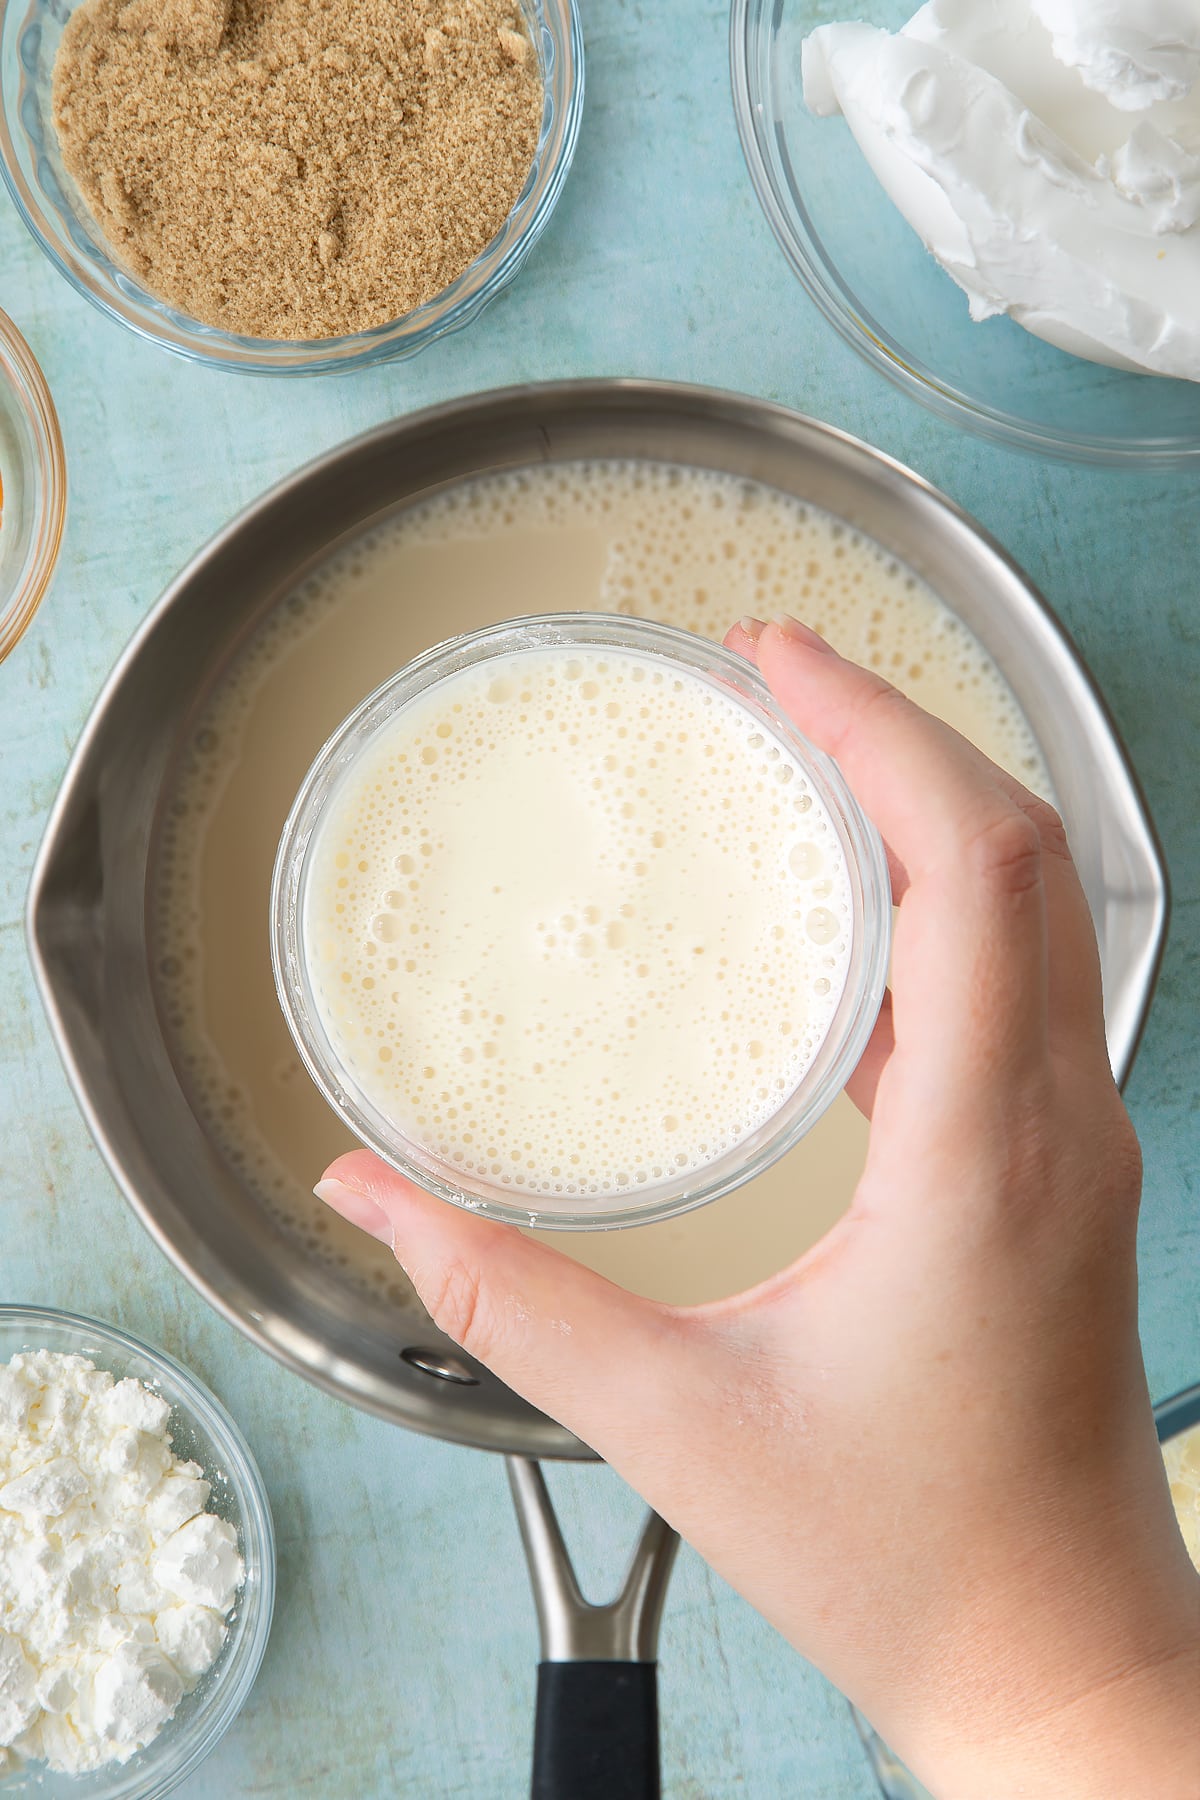 Soya milk, vanilla and sugar in a pan. Above it, a hand holds a small bowl filled with a mixture of cornflour and milk. Ingredients to make vegan custard surround the pan.